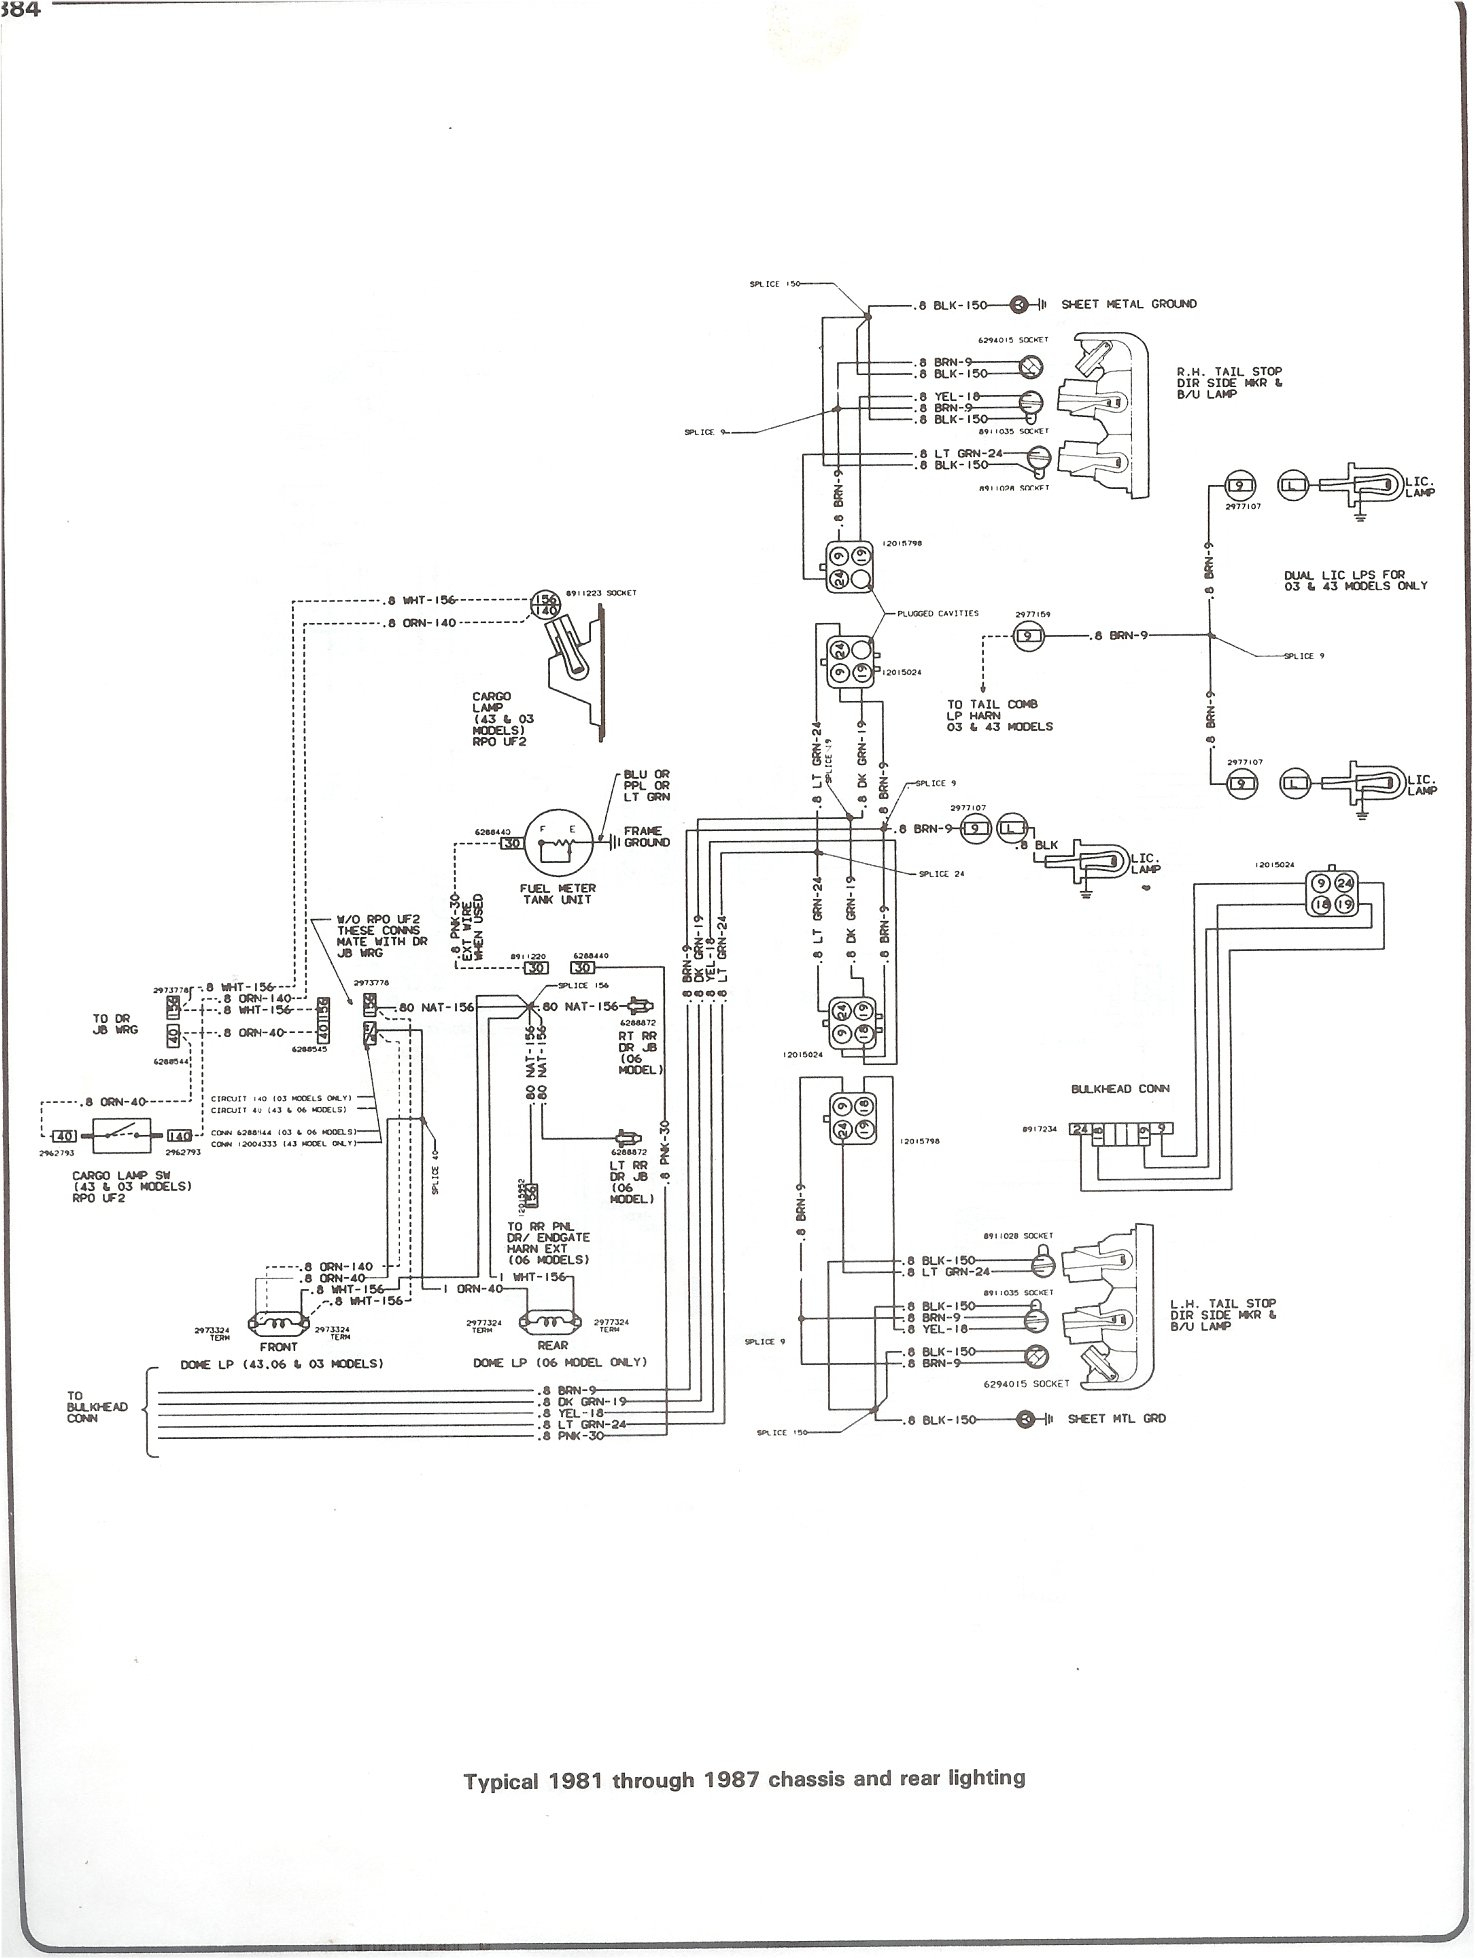 1982 Chevy Truck Wiring Harness - Wiring Diagrams Hubs - 1982 Chevy Truck Wiring Diagram